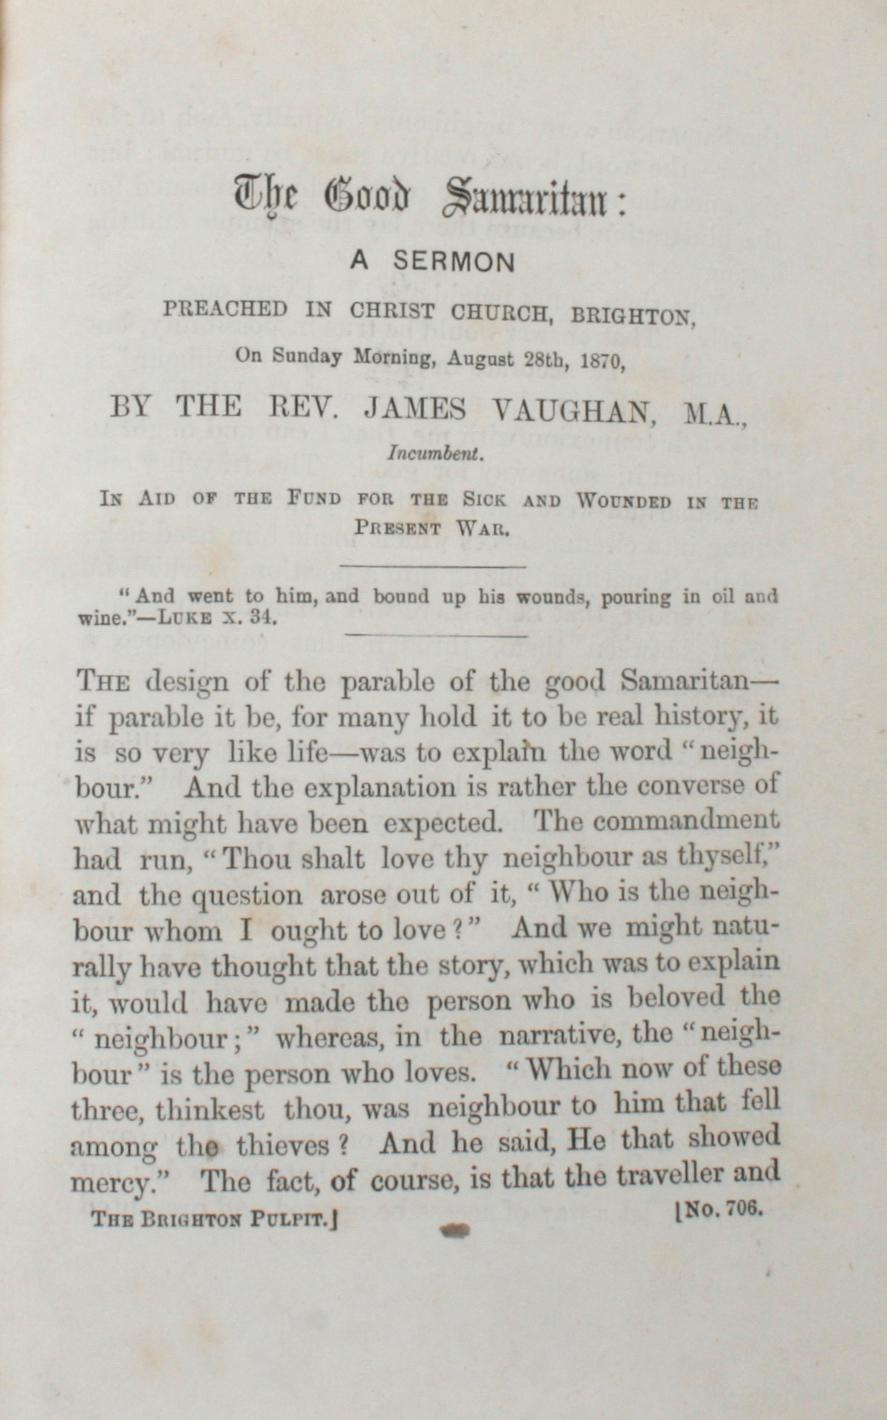 Vaughan's Sermons in two volumes 1870,71,72 and 1873-1874. Brighton: Brighton Pulpit office, no date. Full calf bindings with marbleized edges. Unpaginated. A series of sermons preached by Rev. James Vaughan, M.A. between 1870 and 1874. David James